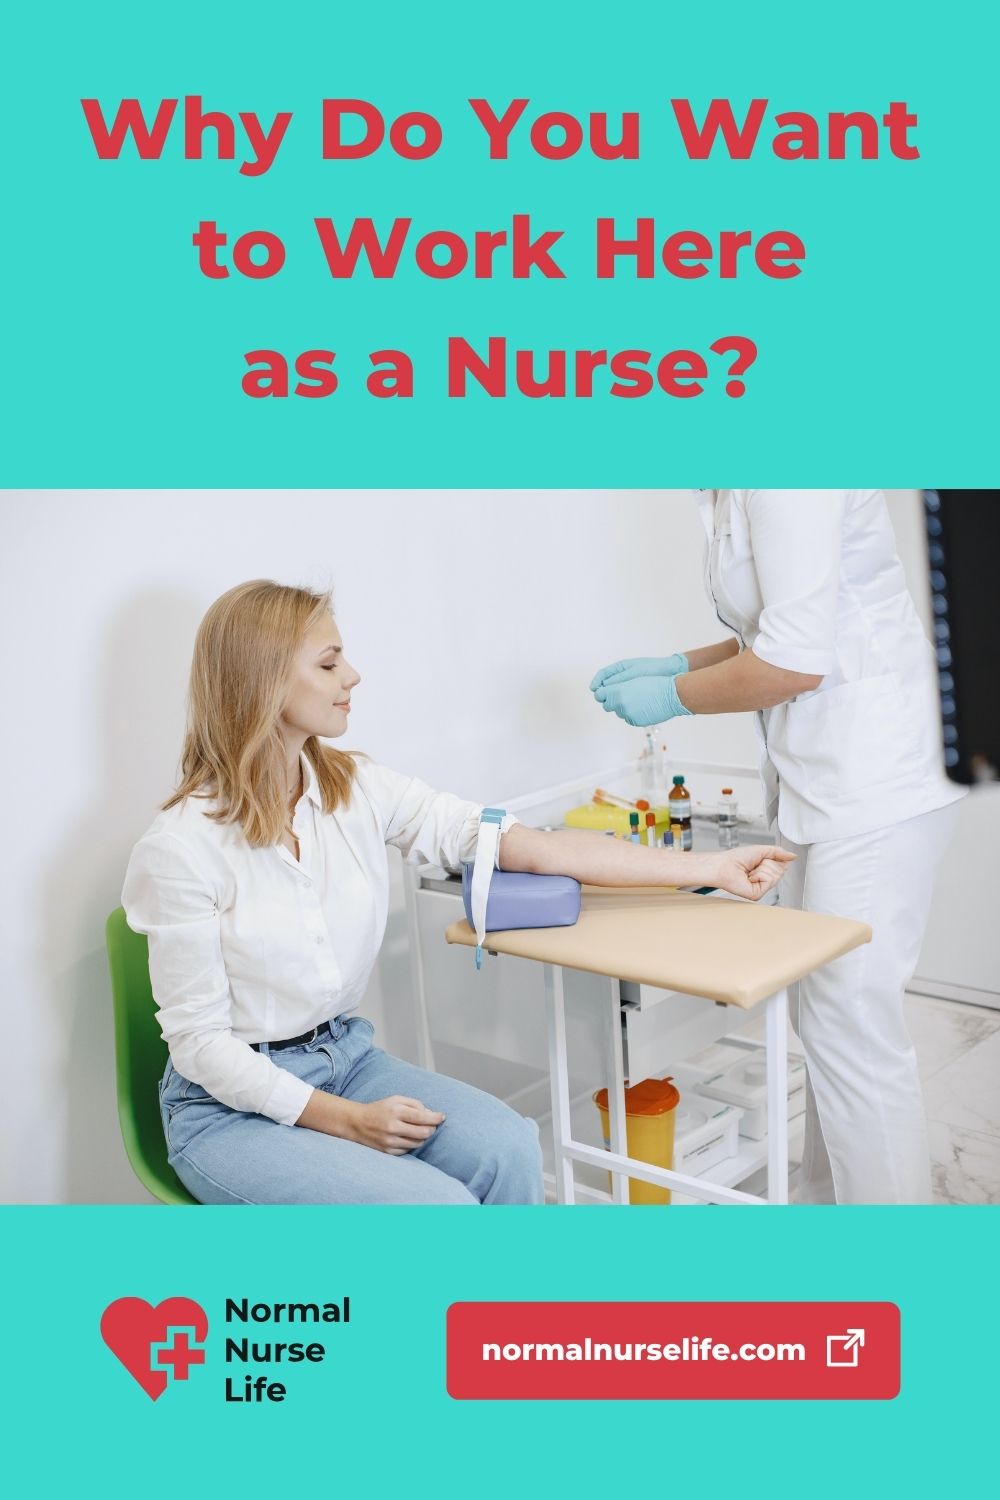 Nursing interview question why do you want to work here